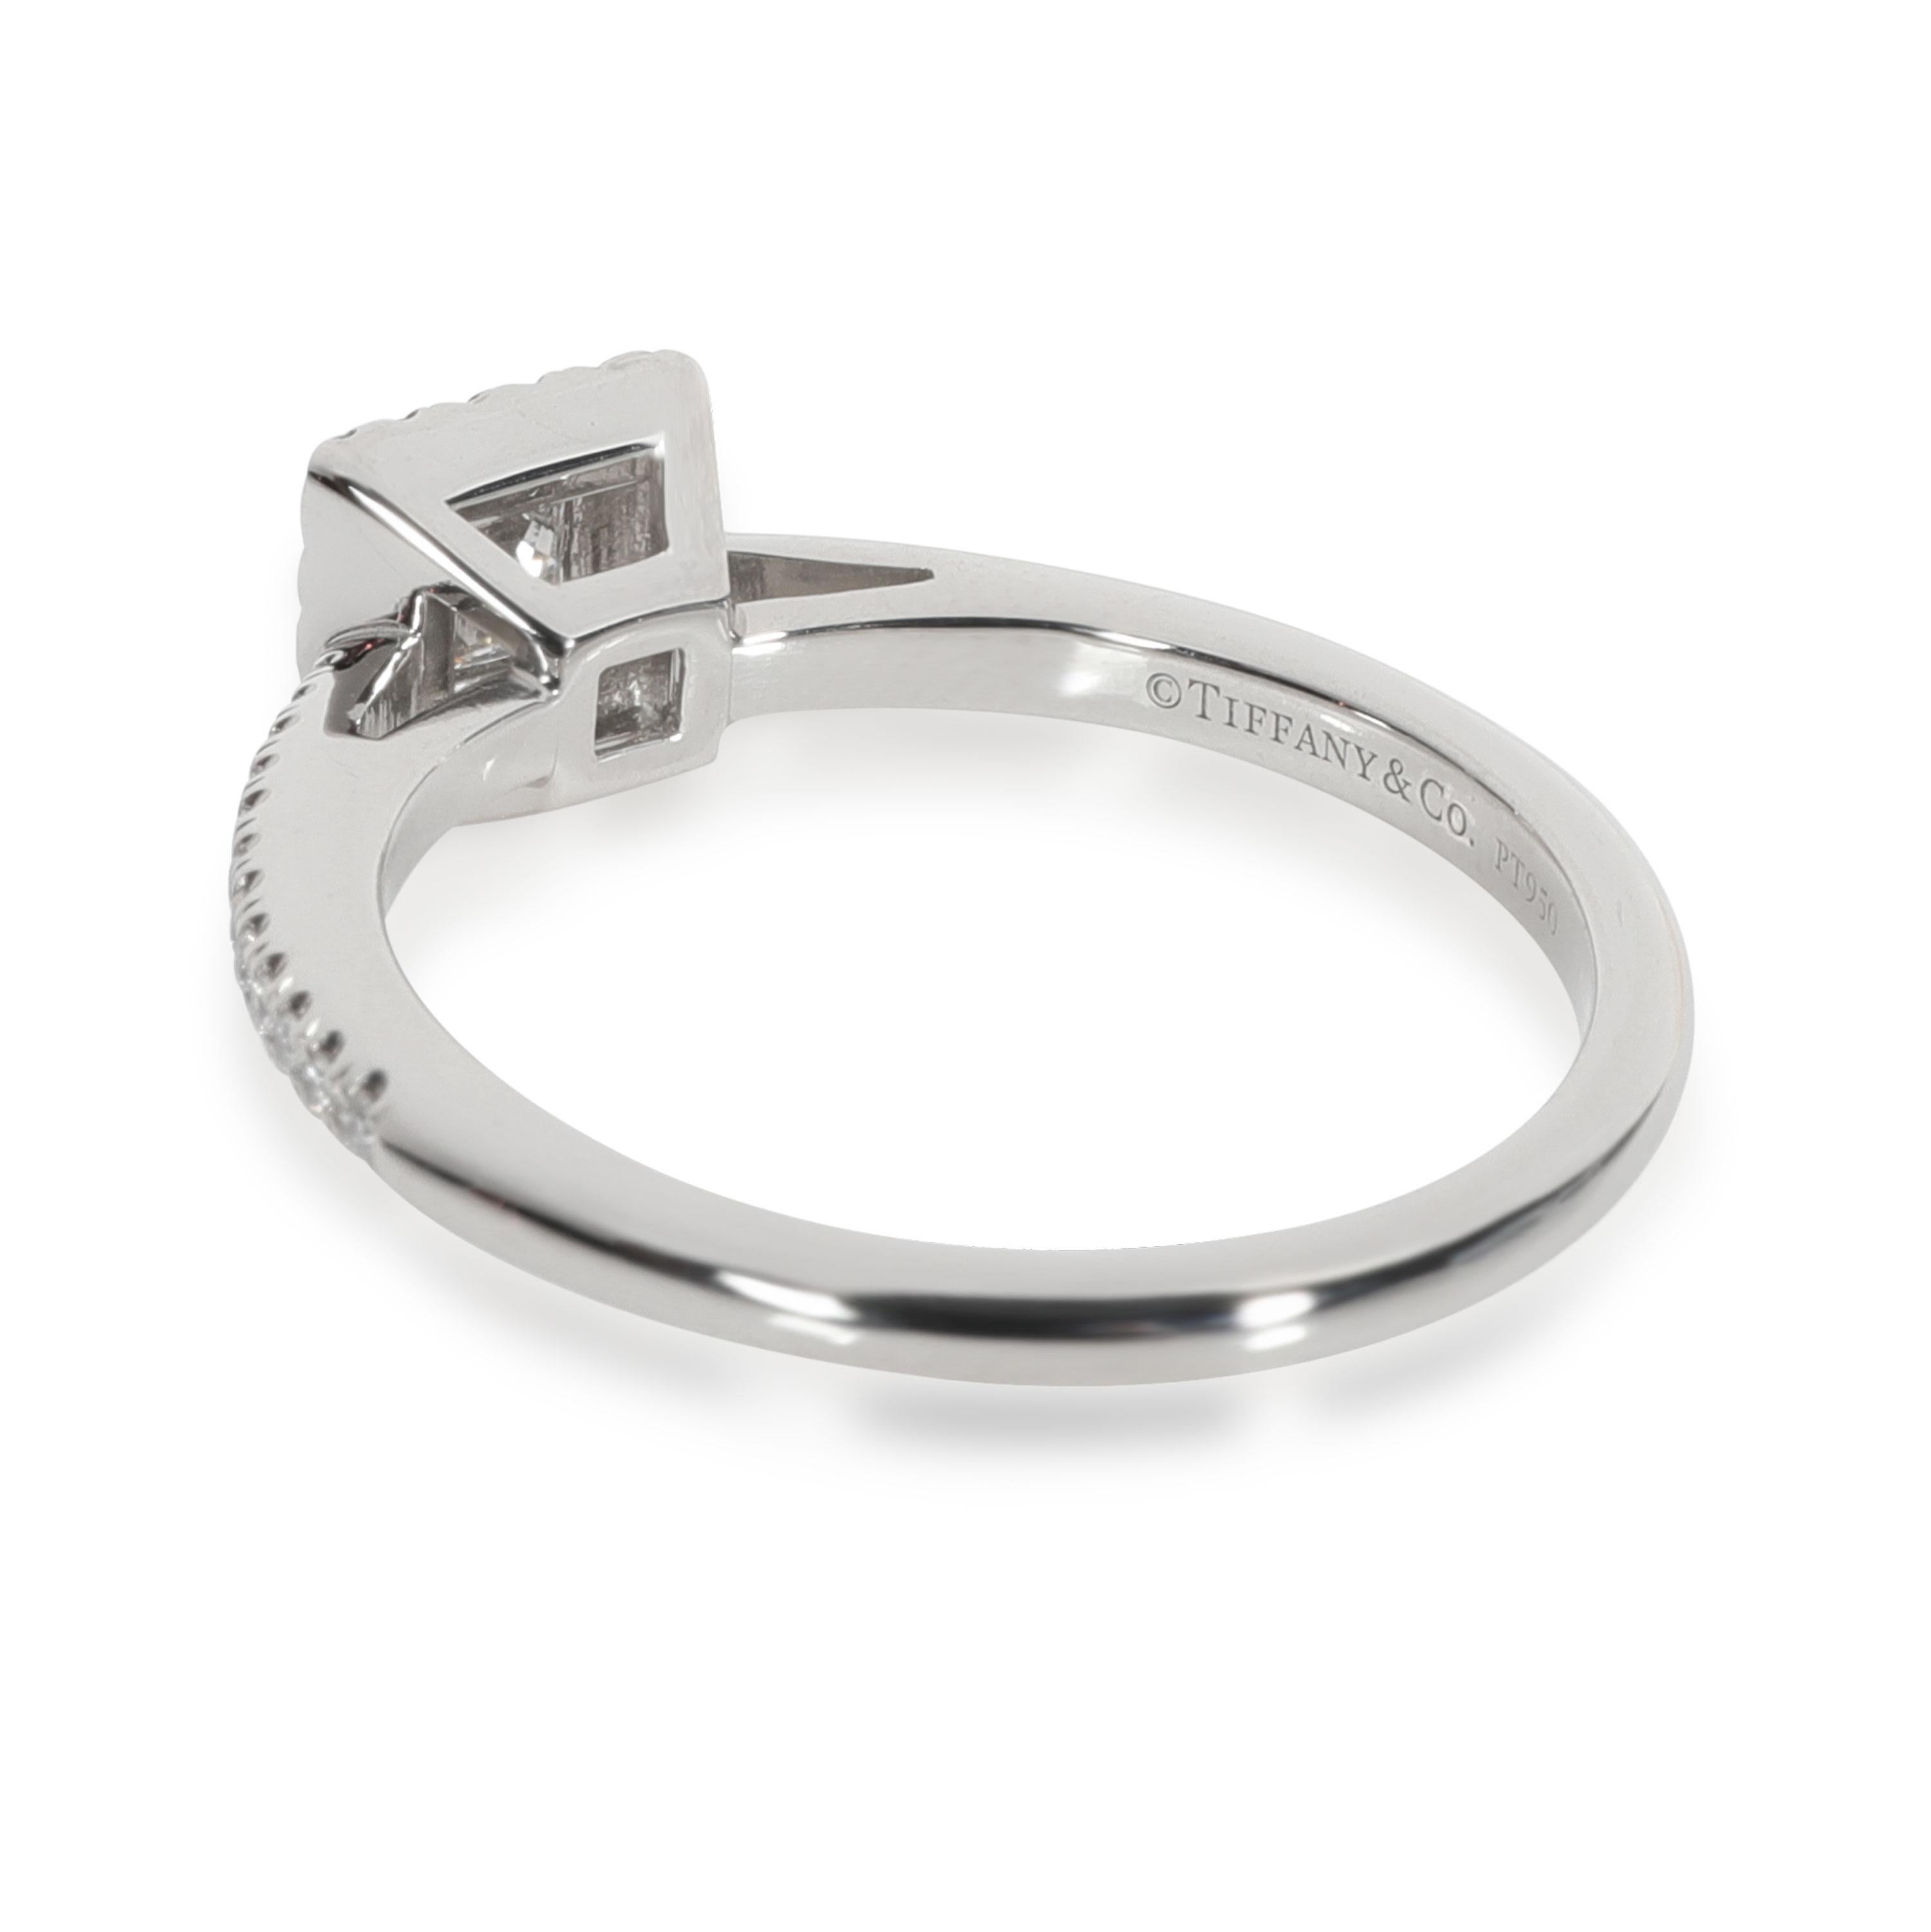 

Tiffany & Co. Grace Princess Diamond Ring in Platinum 0.27 CTW

PRIMARY DETAILS
SKU: 107381
Listing Title: Tiffany & Co. Grace Princess Diamond Ring in Platinum 0.27 CTW
Condition Description: Retails for 4,900 USD. In excellent condition and